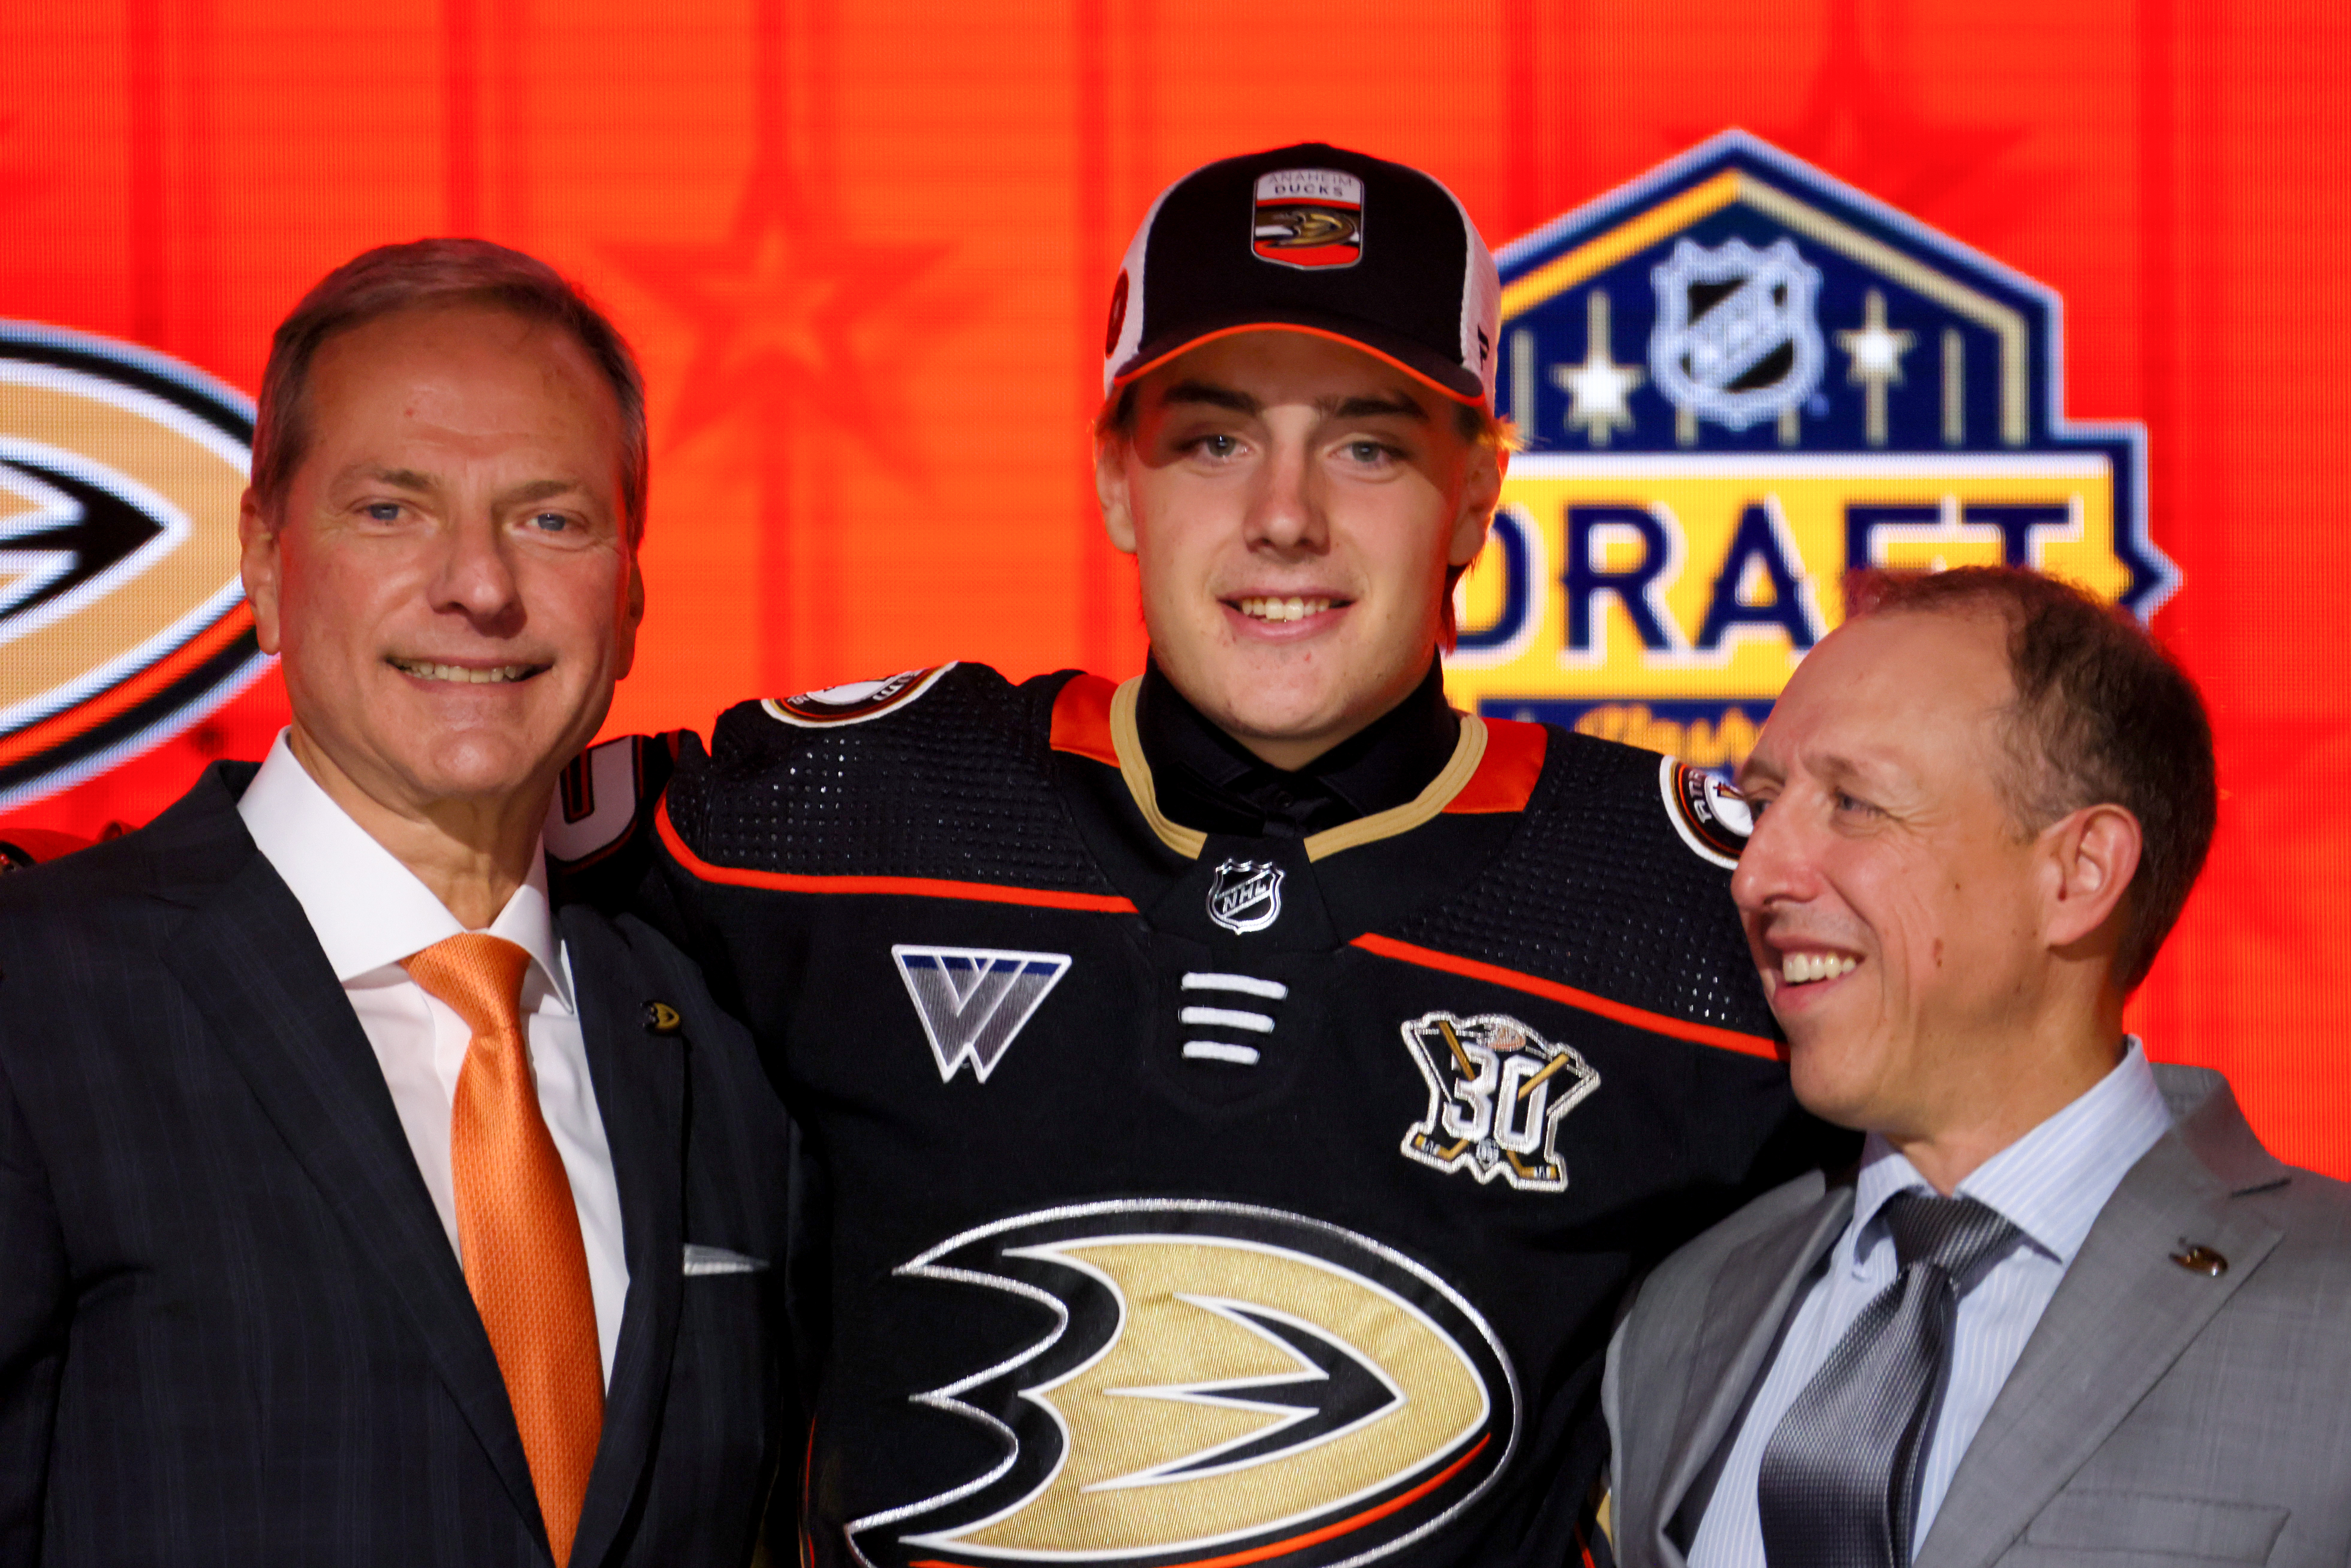 Connor Bedard, Family comes first for projected No. 1 NHL draft pick